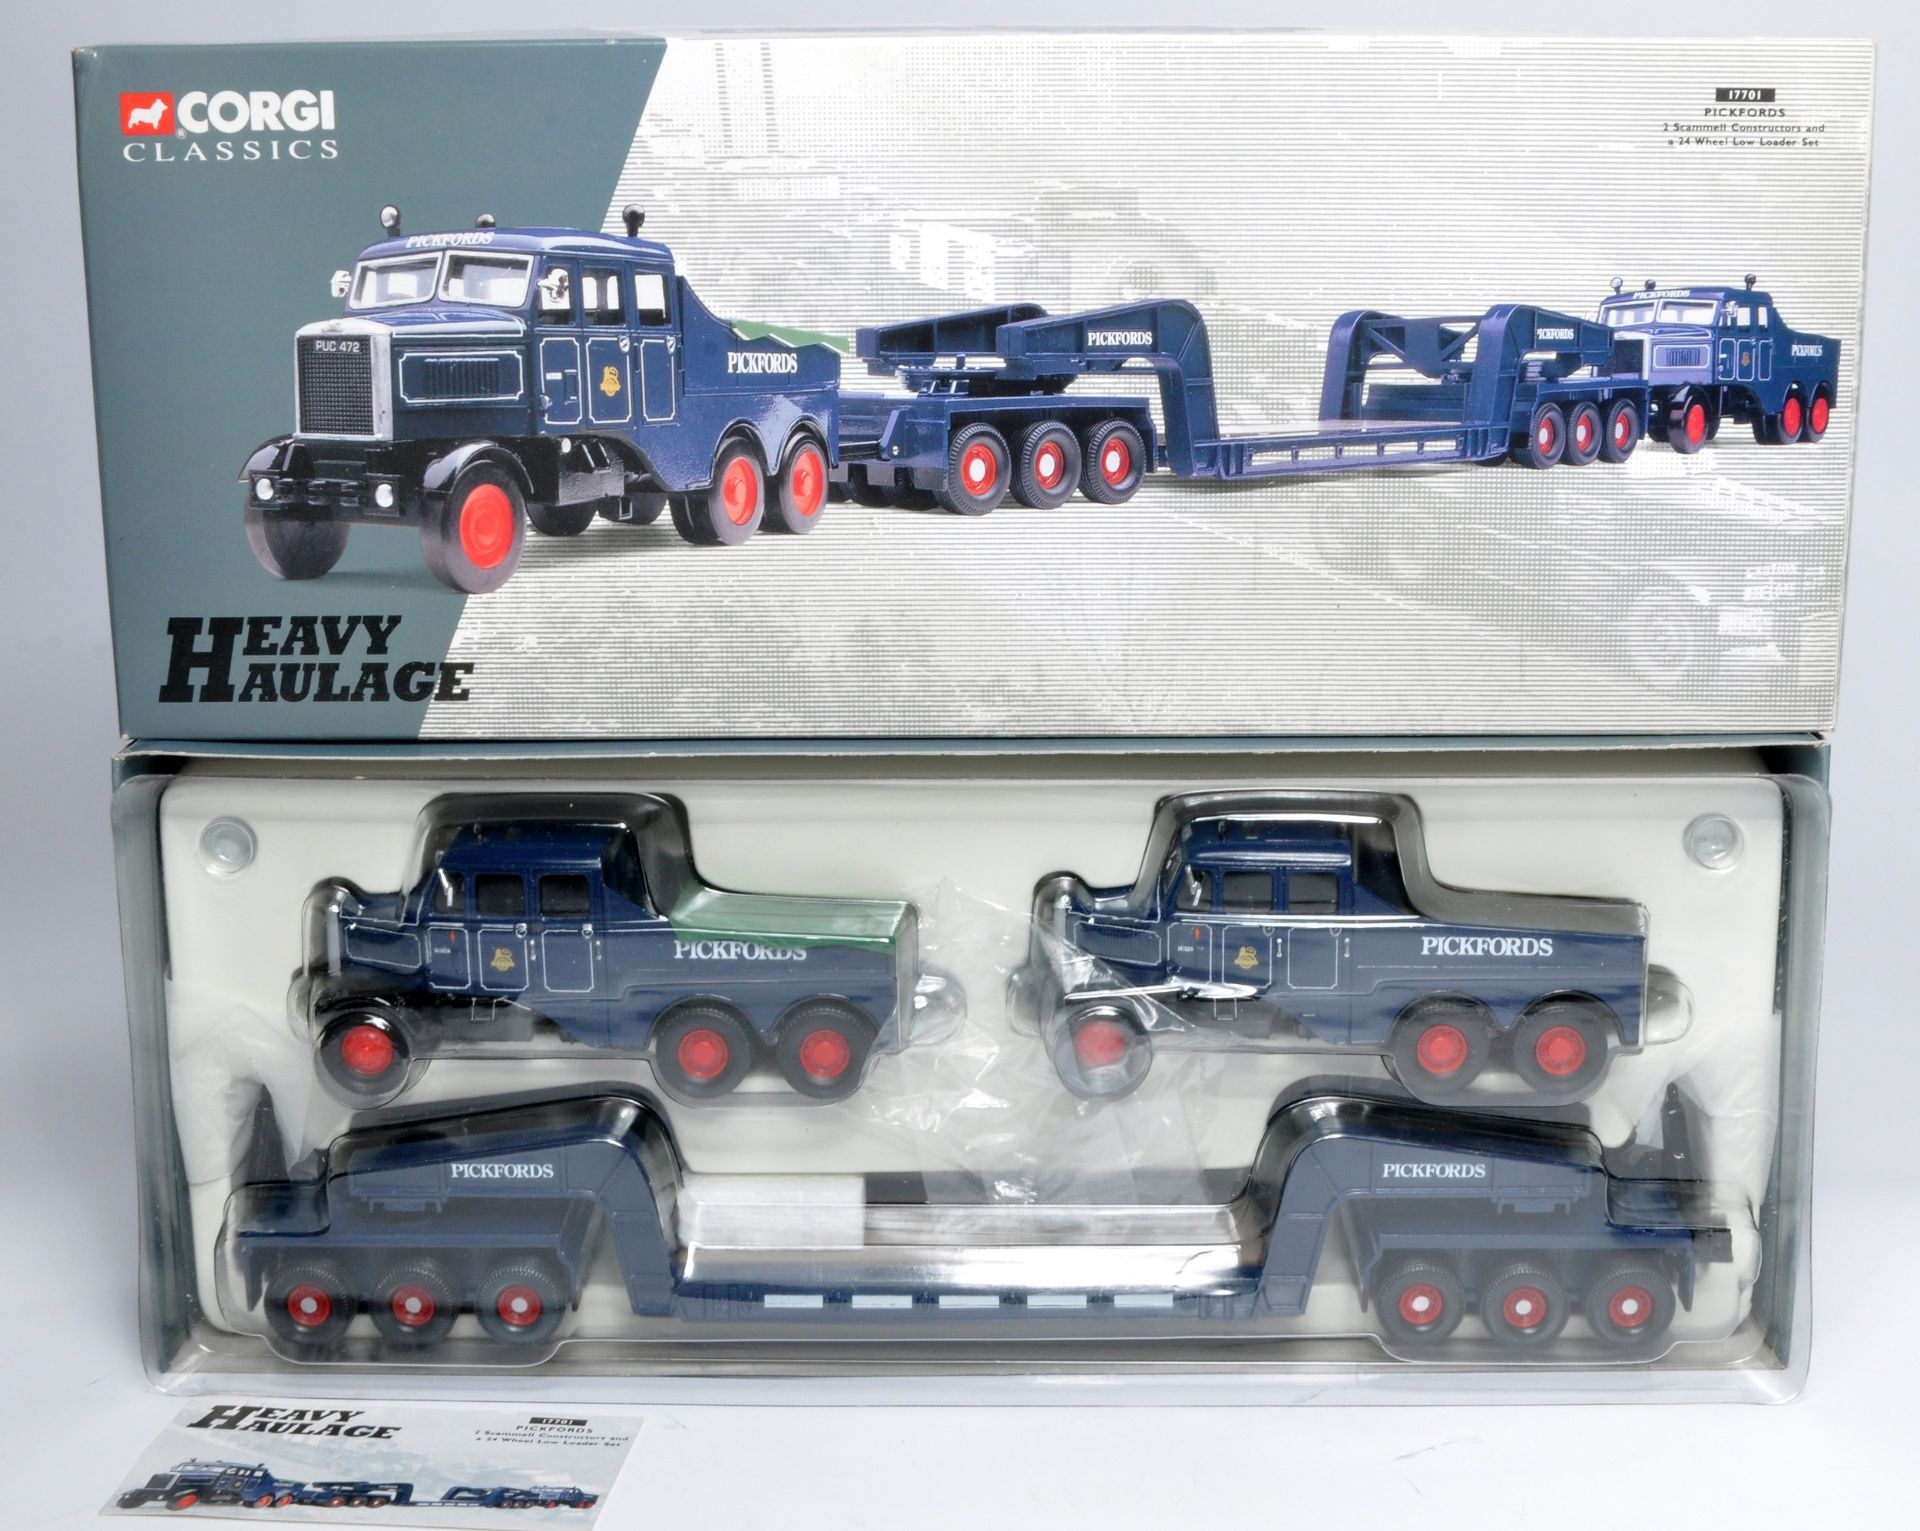 Corgi 1/50 diecast model truck issue comprising No. 17701 Scammell Constructor Set in the livery